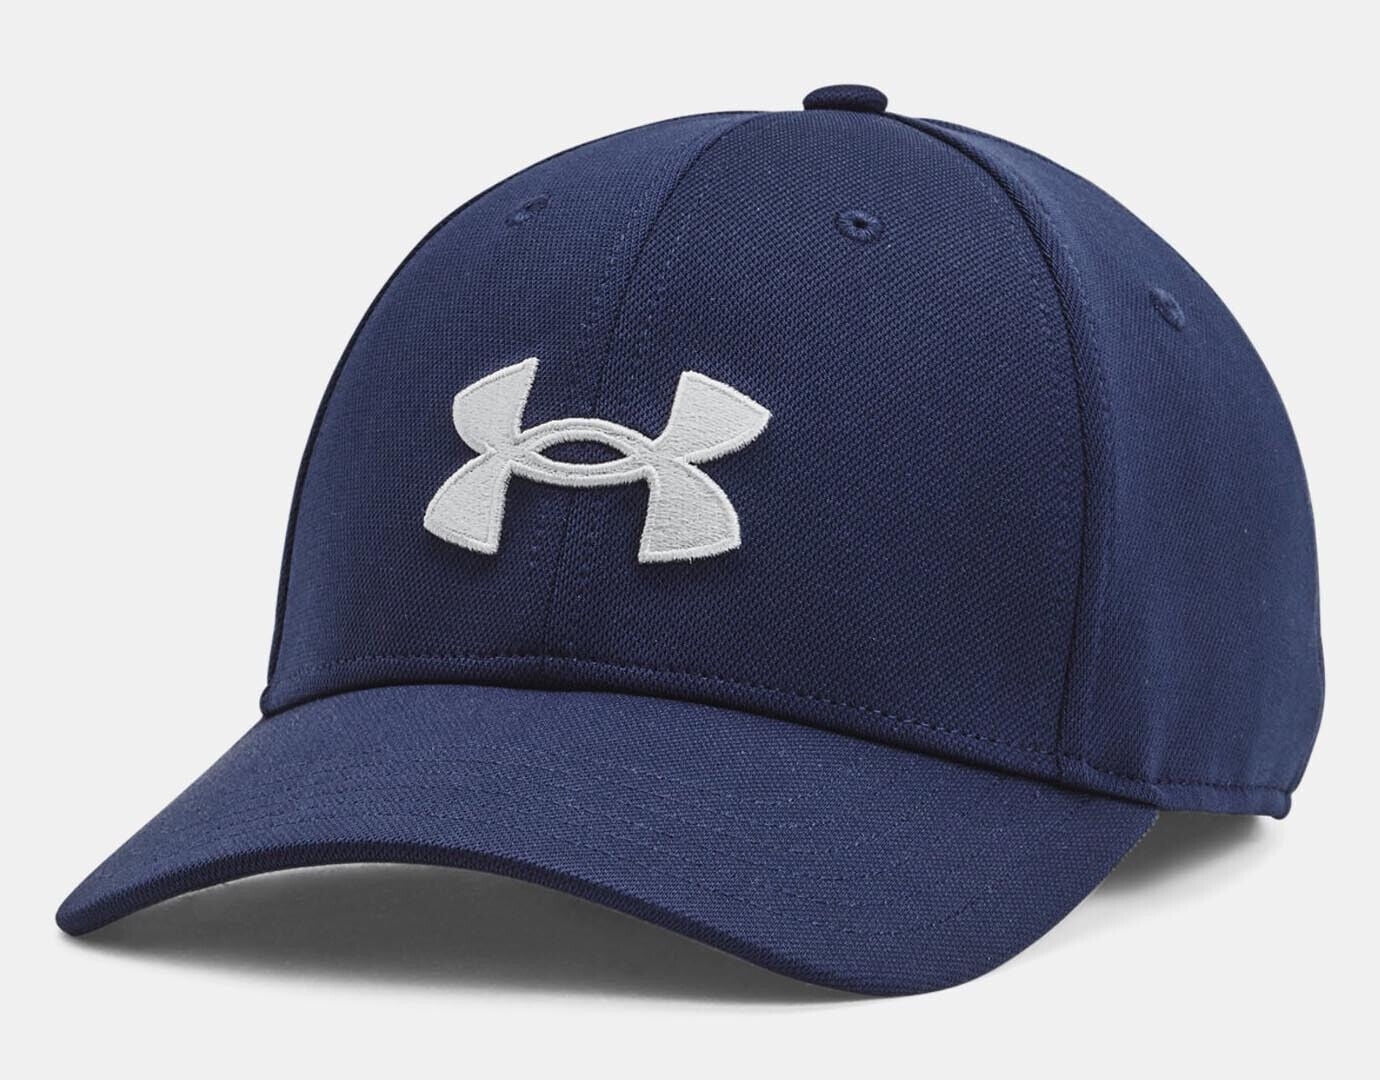 UNDER ARMOUR Fish Hat Ball Cap Flex FITTED L-XL Mesh Back - La Paz County  Sheriff's Office Dedicated to Service